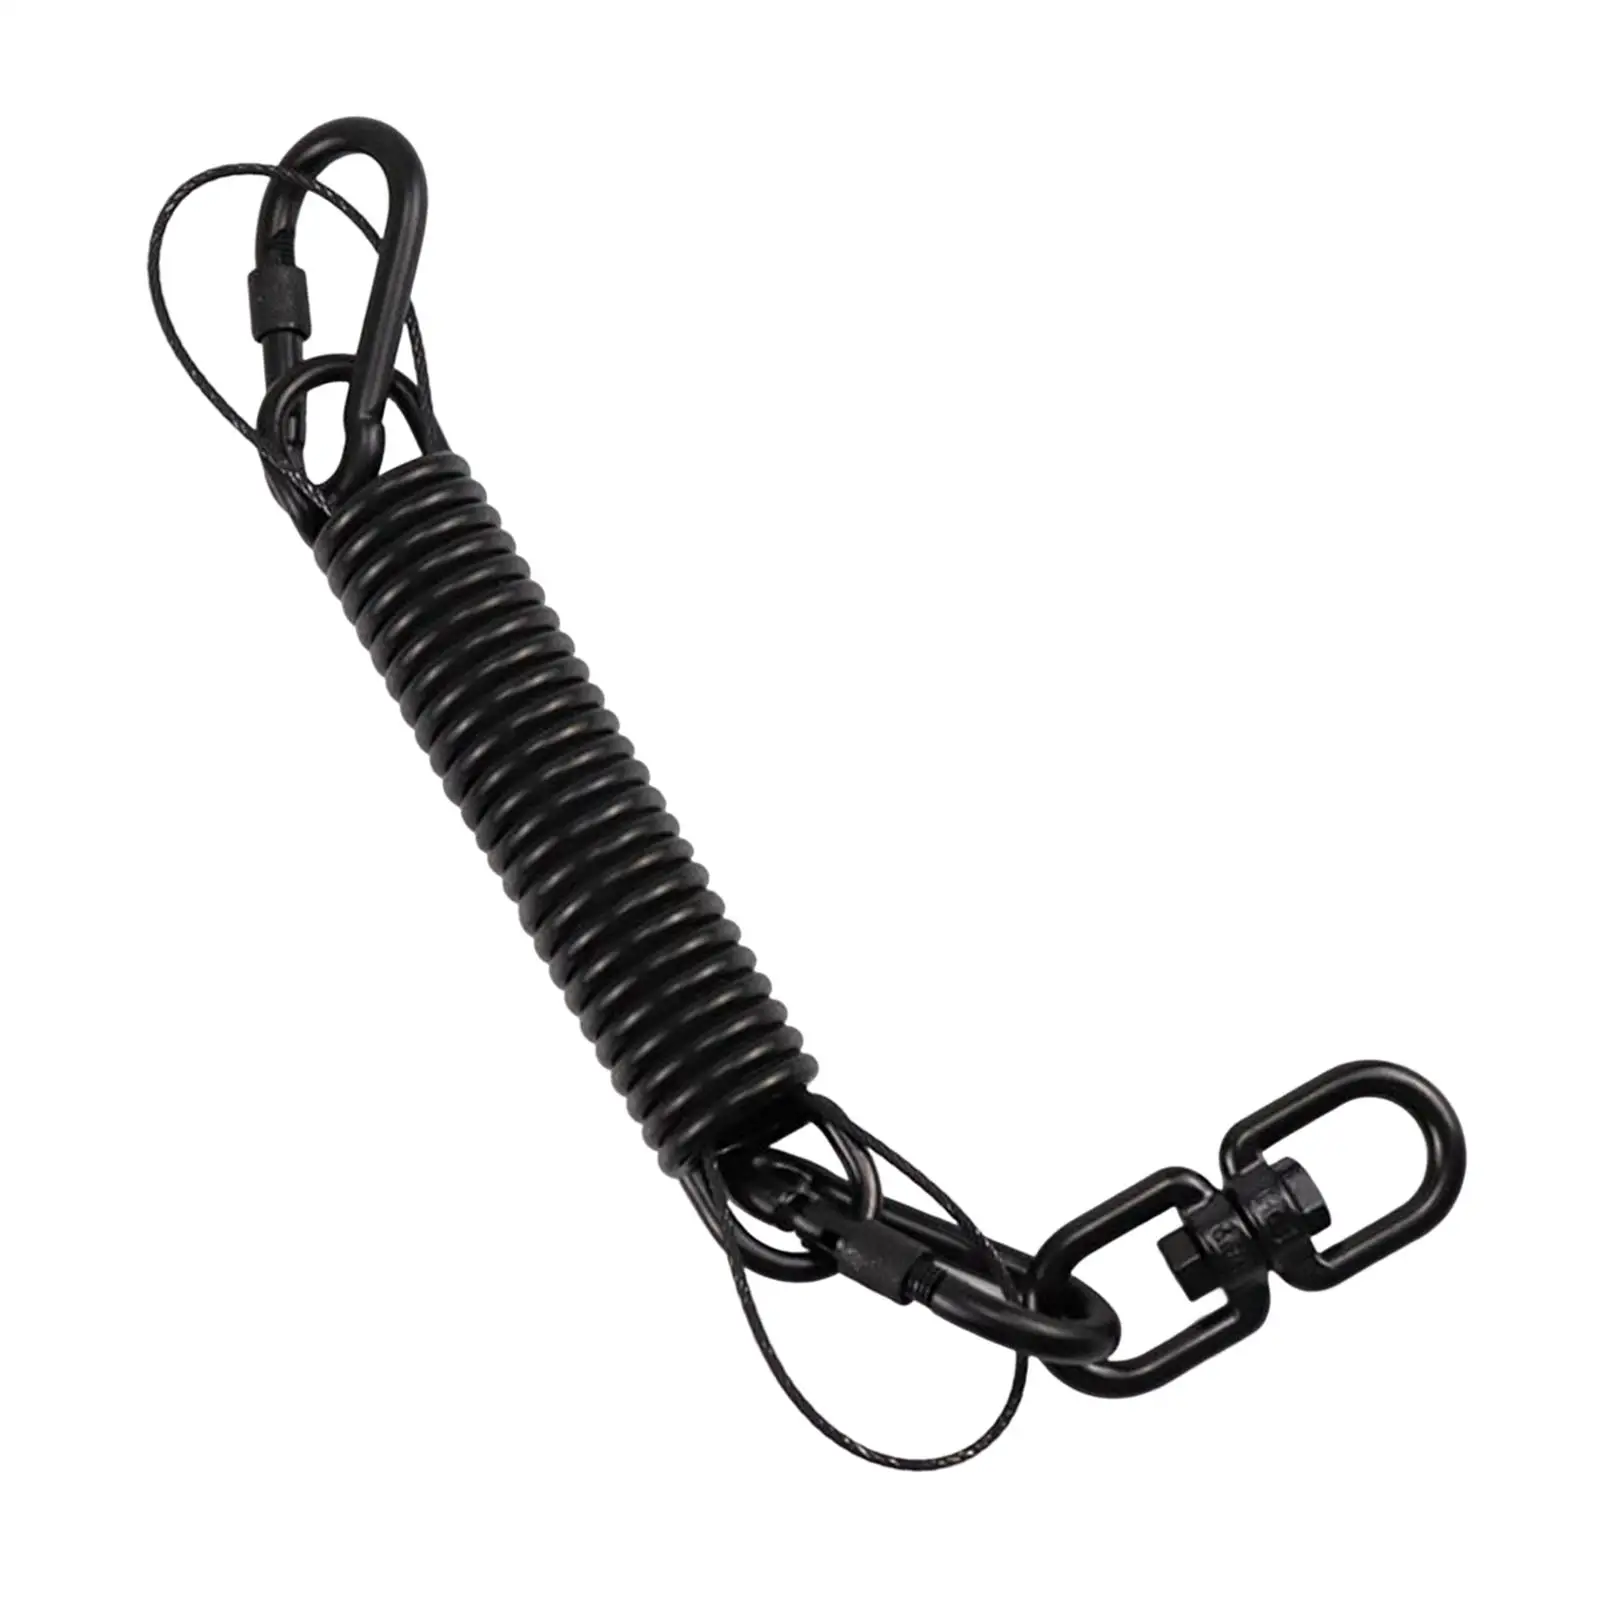 Heavy Duty Swing Spring Portable Shock Absorbing with 2 Hooks Hammock Spring for Hanging Swing Outdoor Heavy Bag,